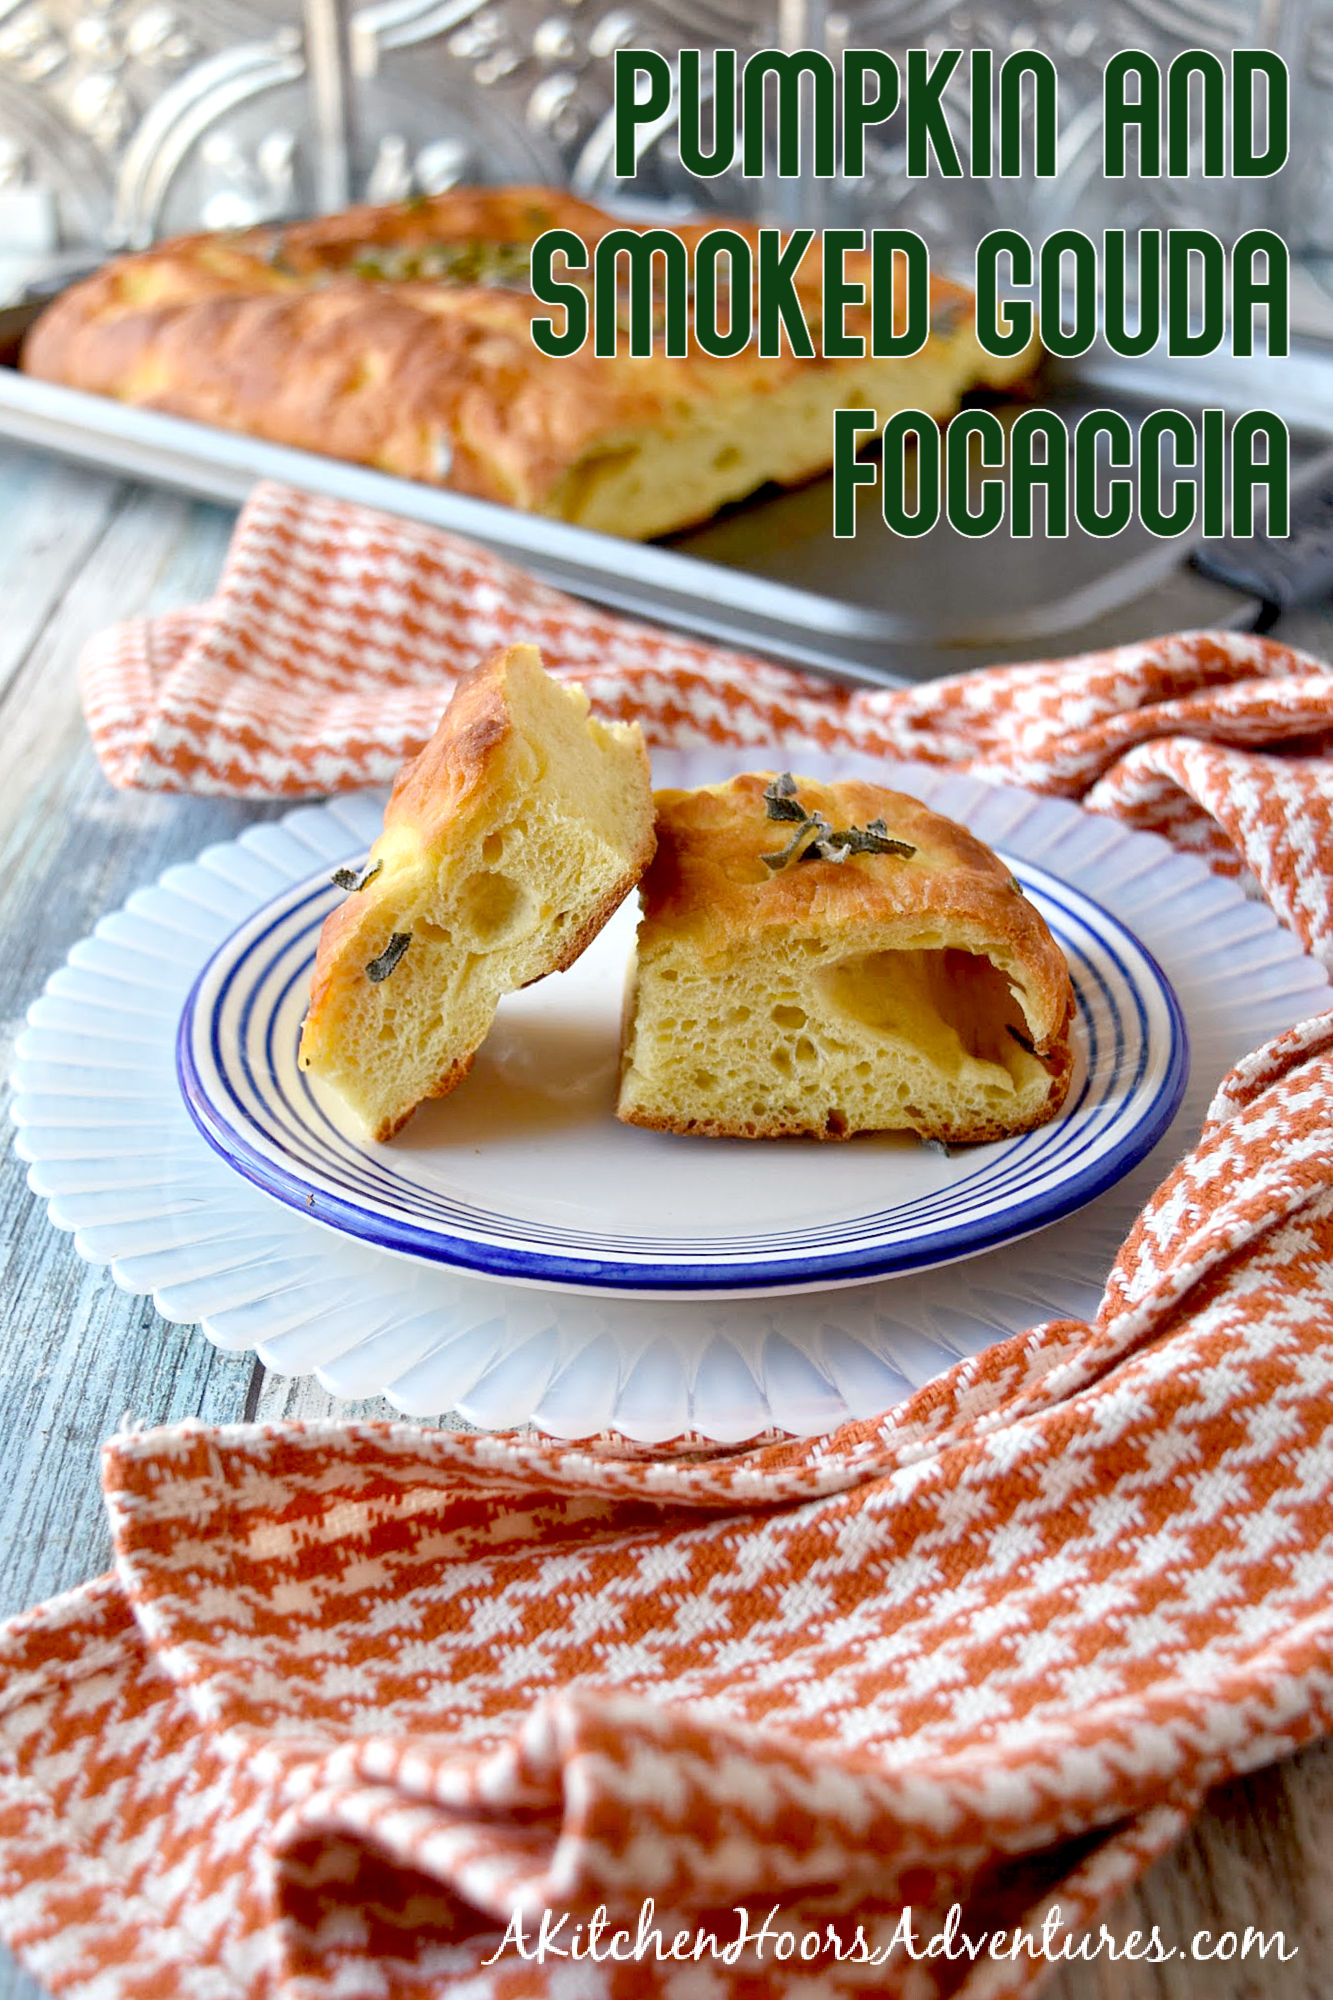 Pumpkin and Smoked Gouda Focaccia has a slightly sweet pumpkin flavor and delicious smokiness from the Gouda.  It's perfect paired with pumpkin gnocchi. #PumpkinWeek